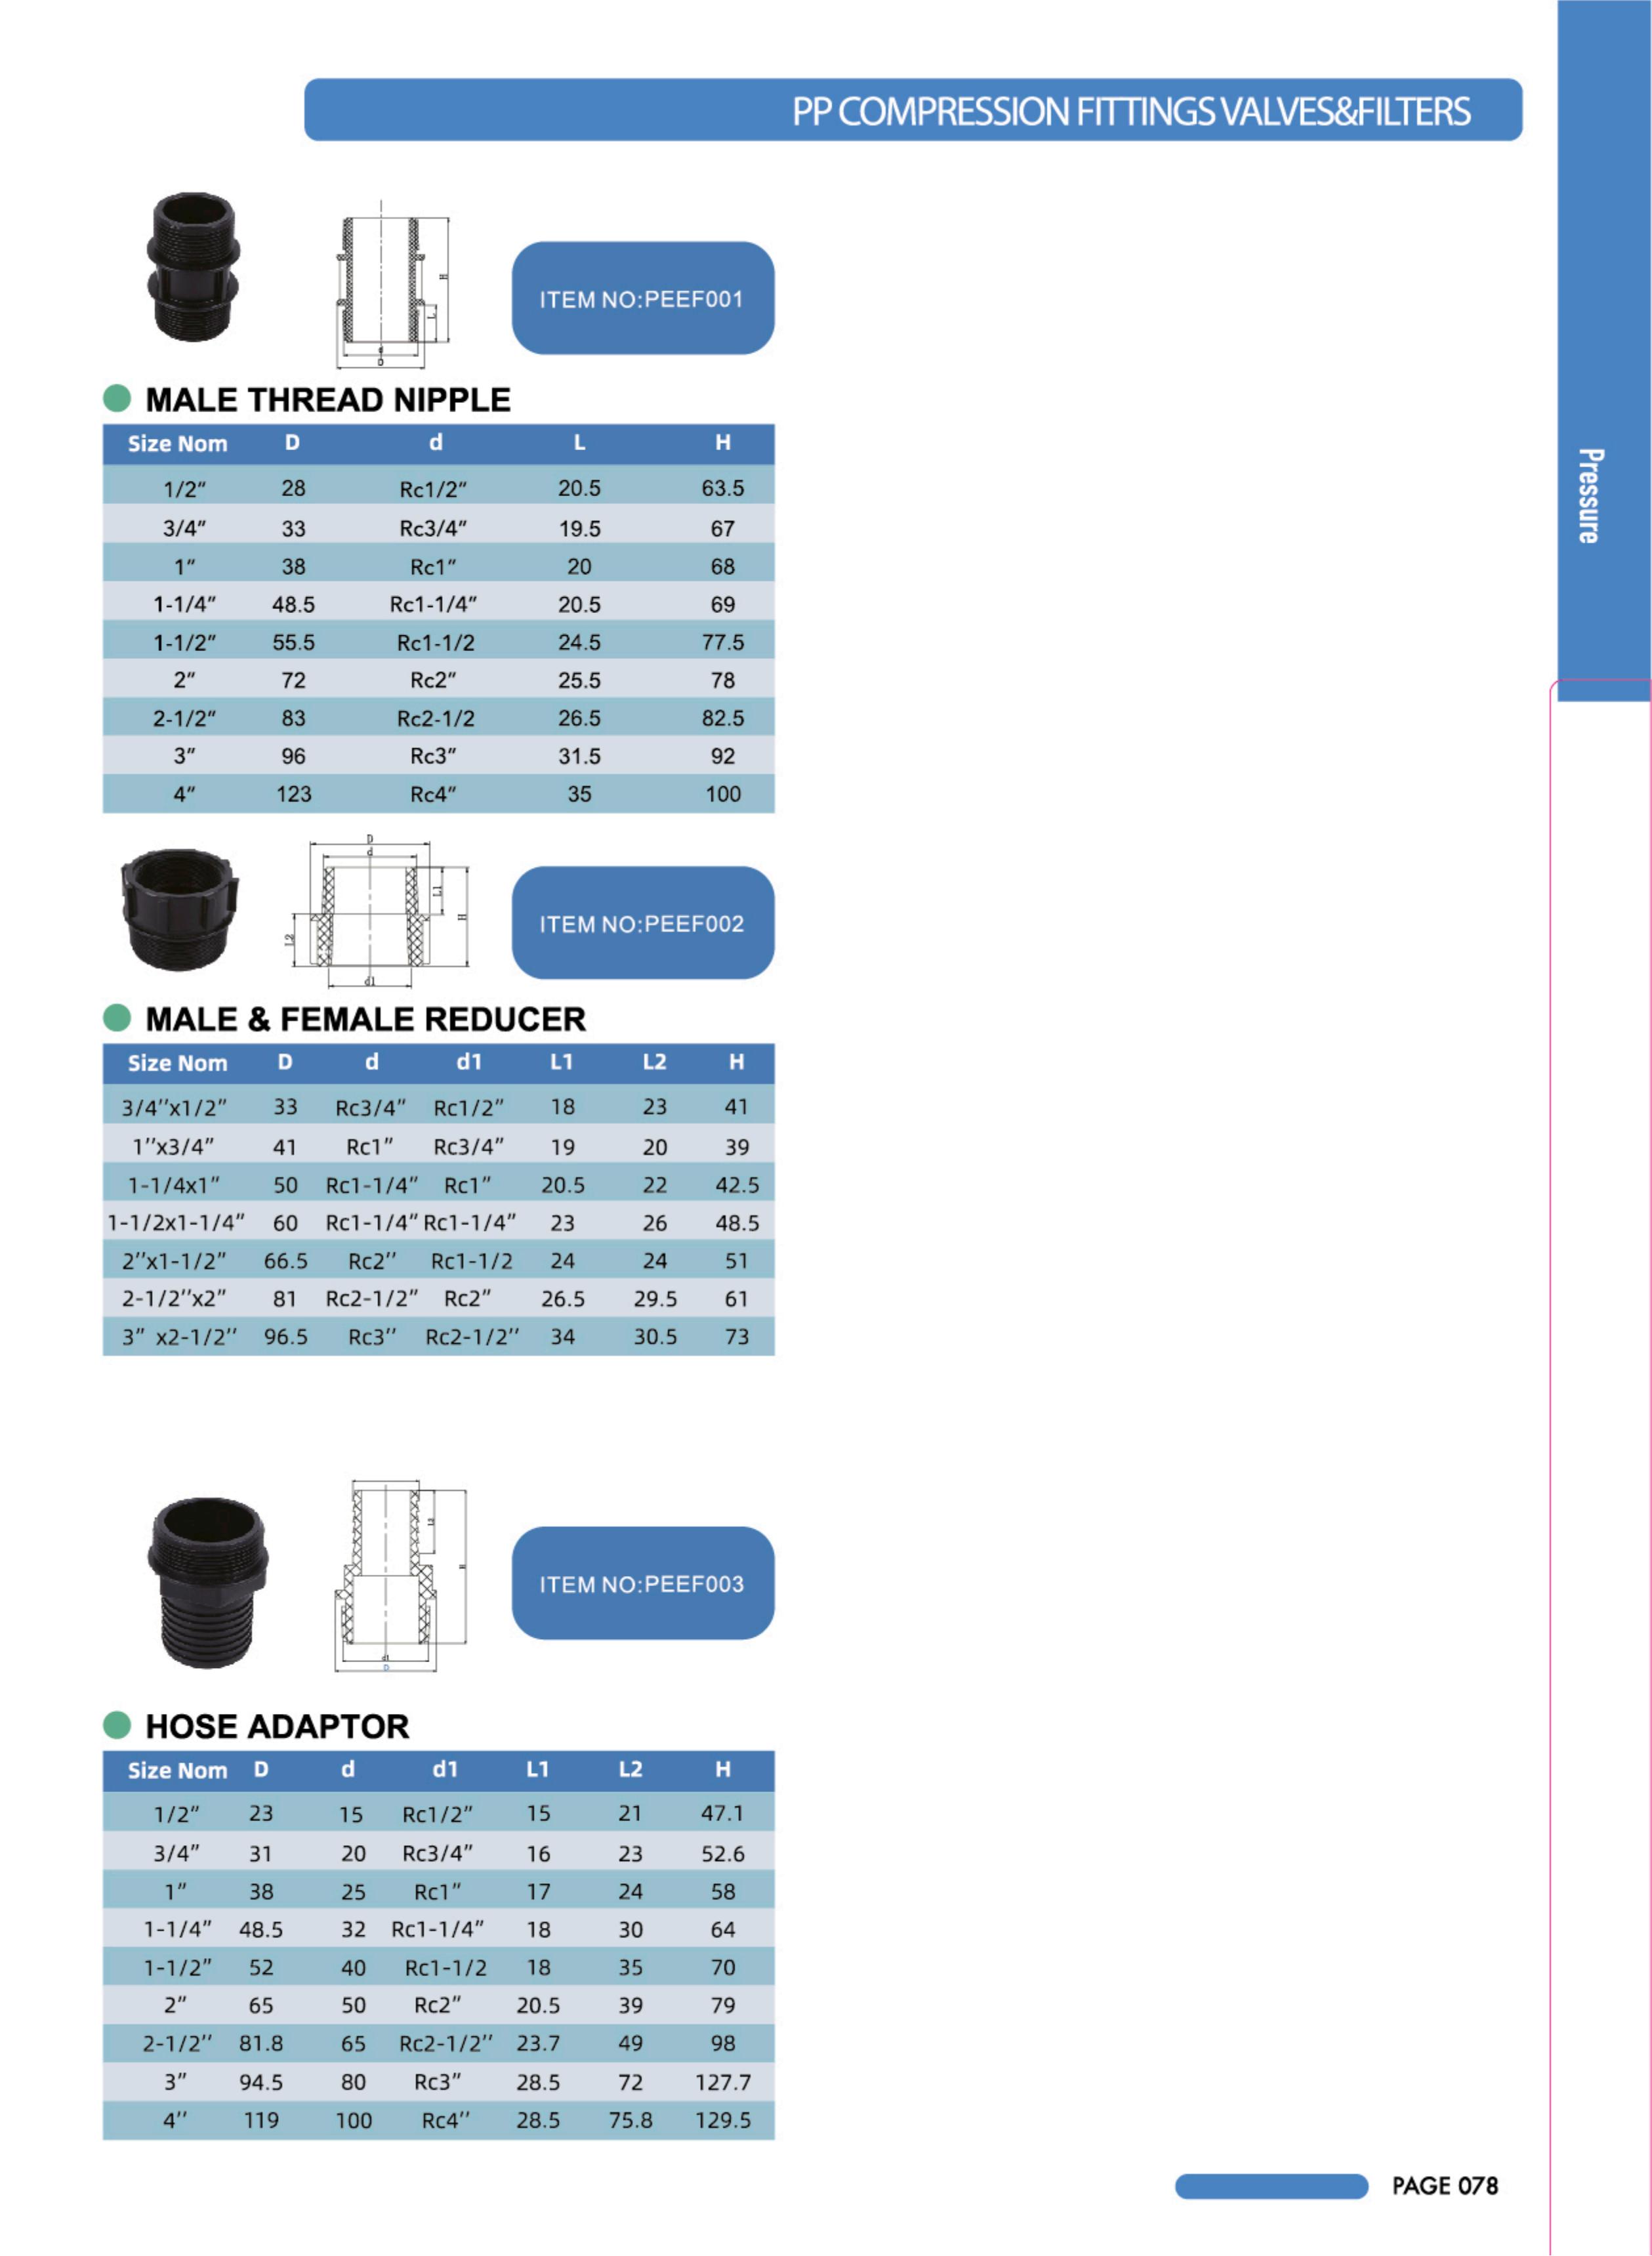 PP COMPRESSION FITTINGS AND VALVES